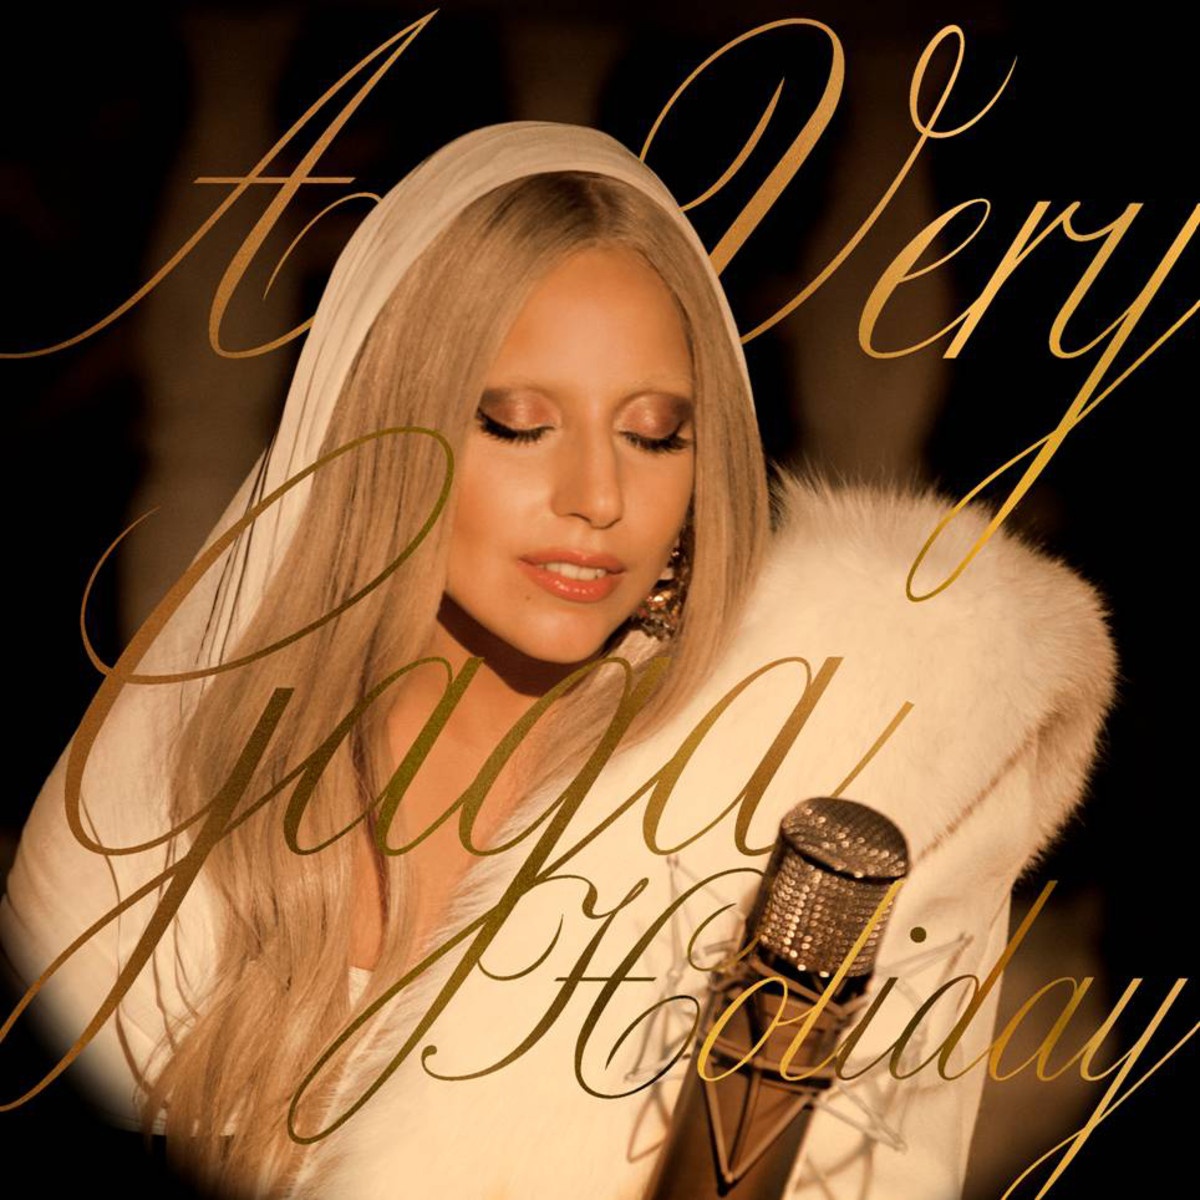 The Edge Of Glory - Live From "A Very Gaga Thanksgiving"